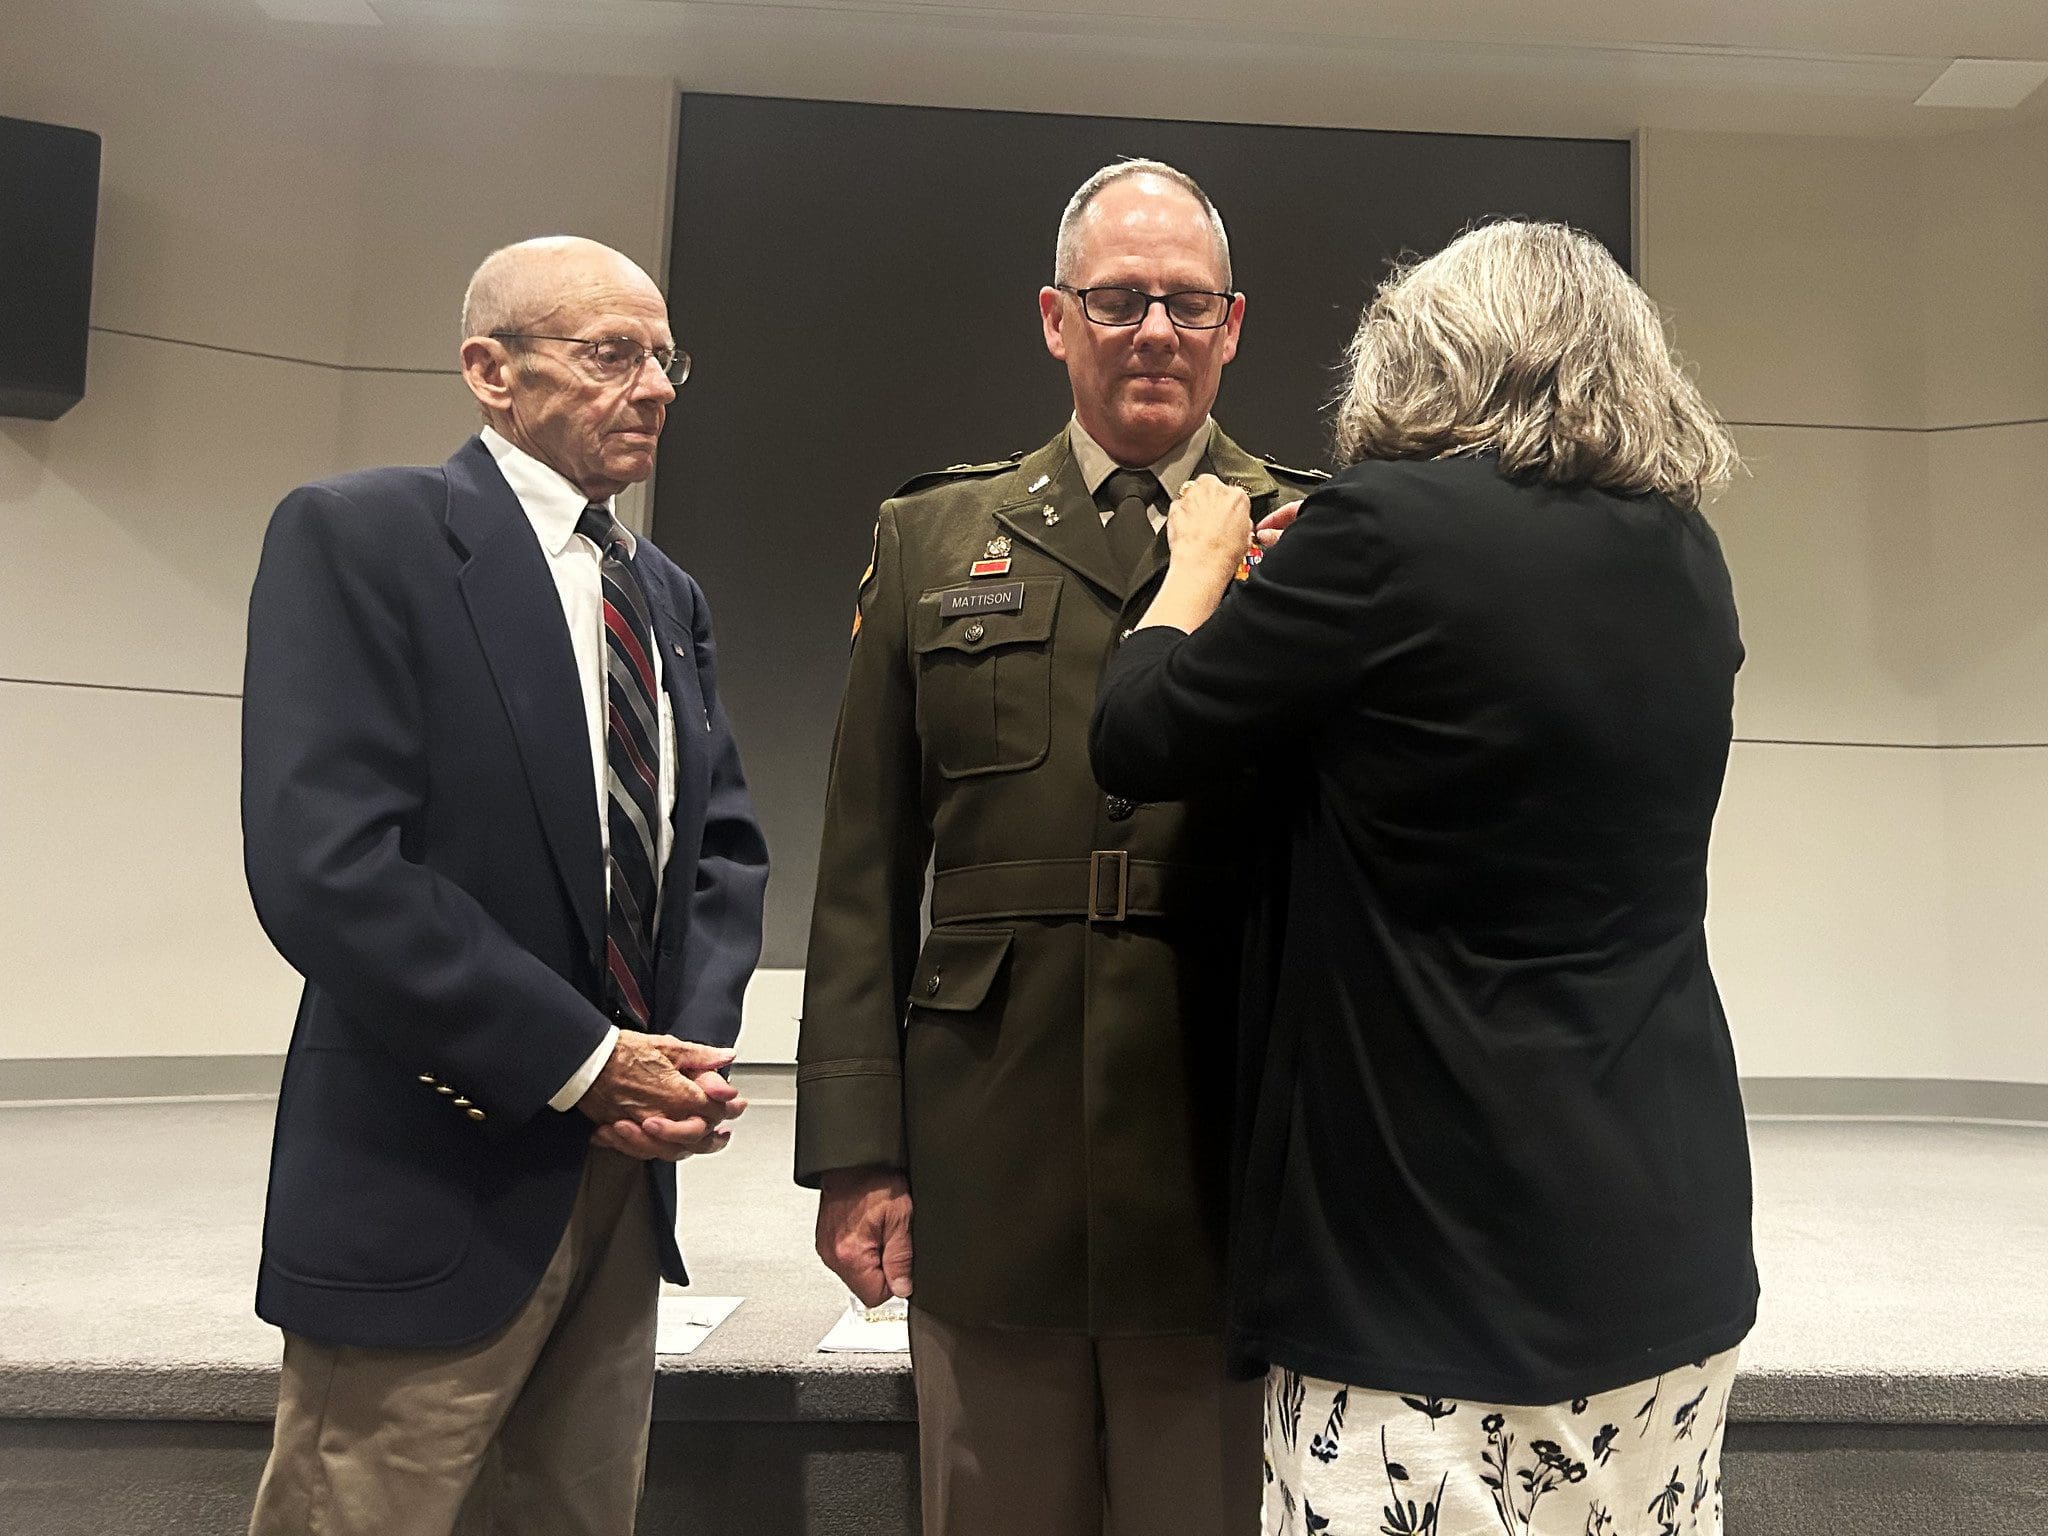 Command Chief Warrant Officer Charles Mattison has chief warrant officer 5 rank pinned on by his father Michael and wife Kathy during a July 12 promotion ceremony at Joint Force Headquarters’ Witmer Hall in Madison, Wis. Wisconsin National Guard photo by Staff Sgt. Alice Ripberger